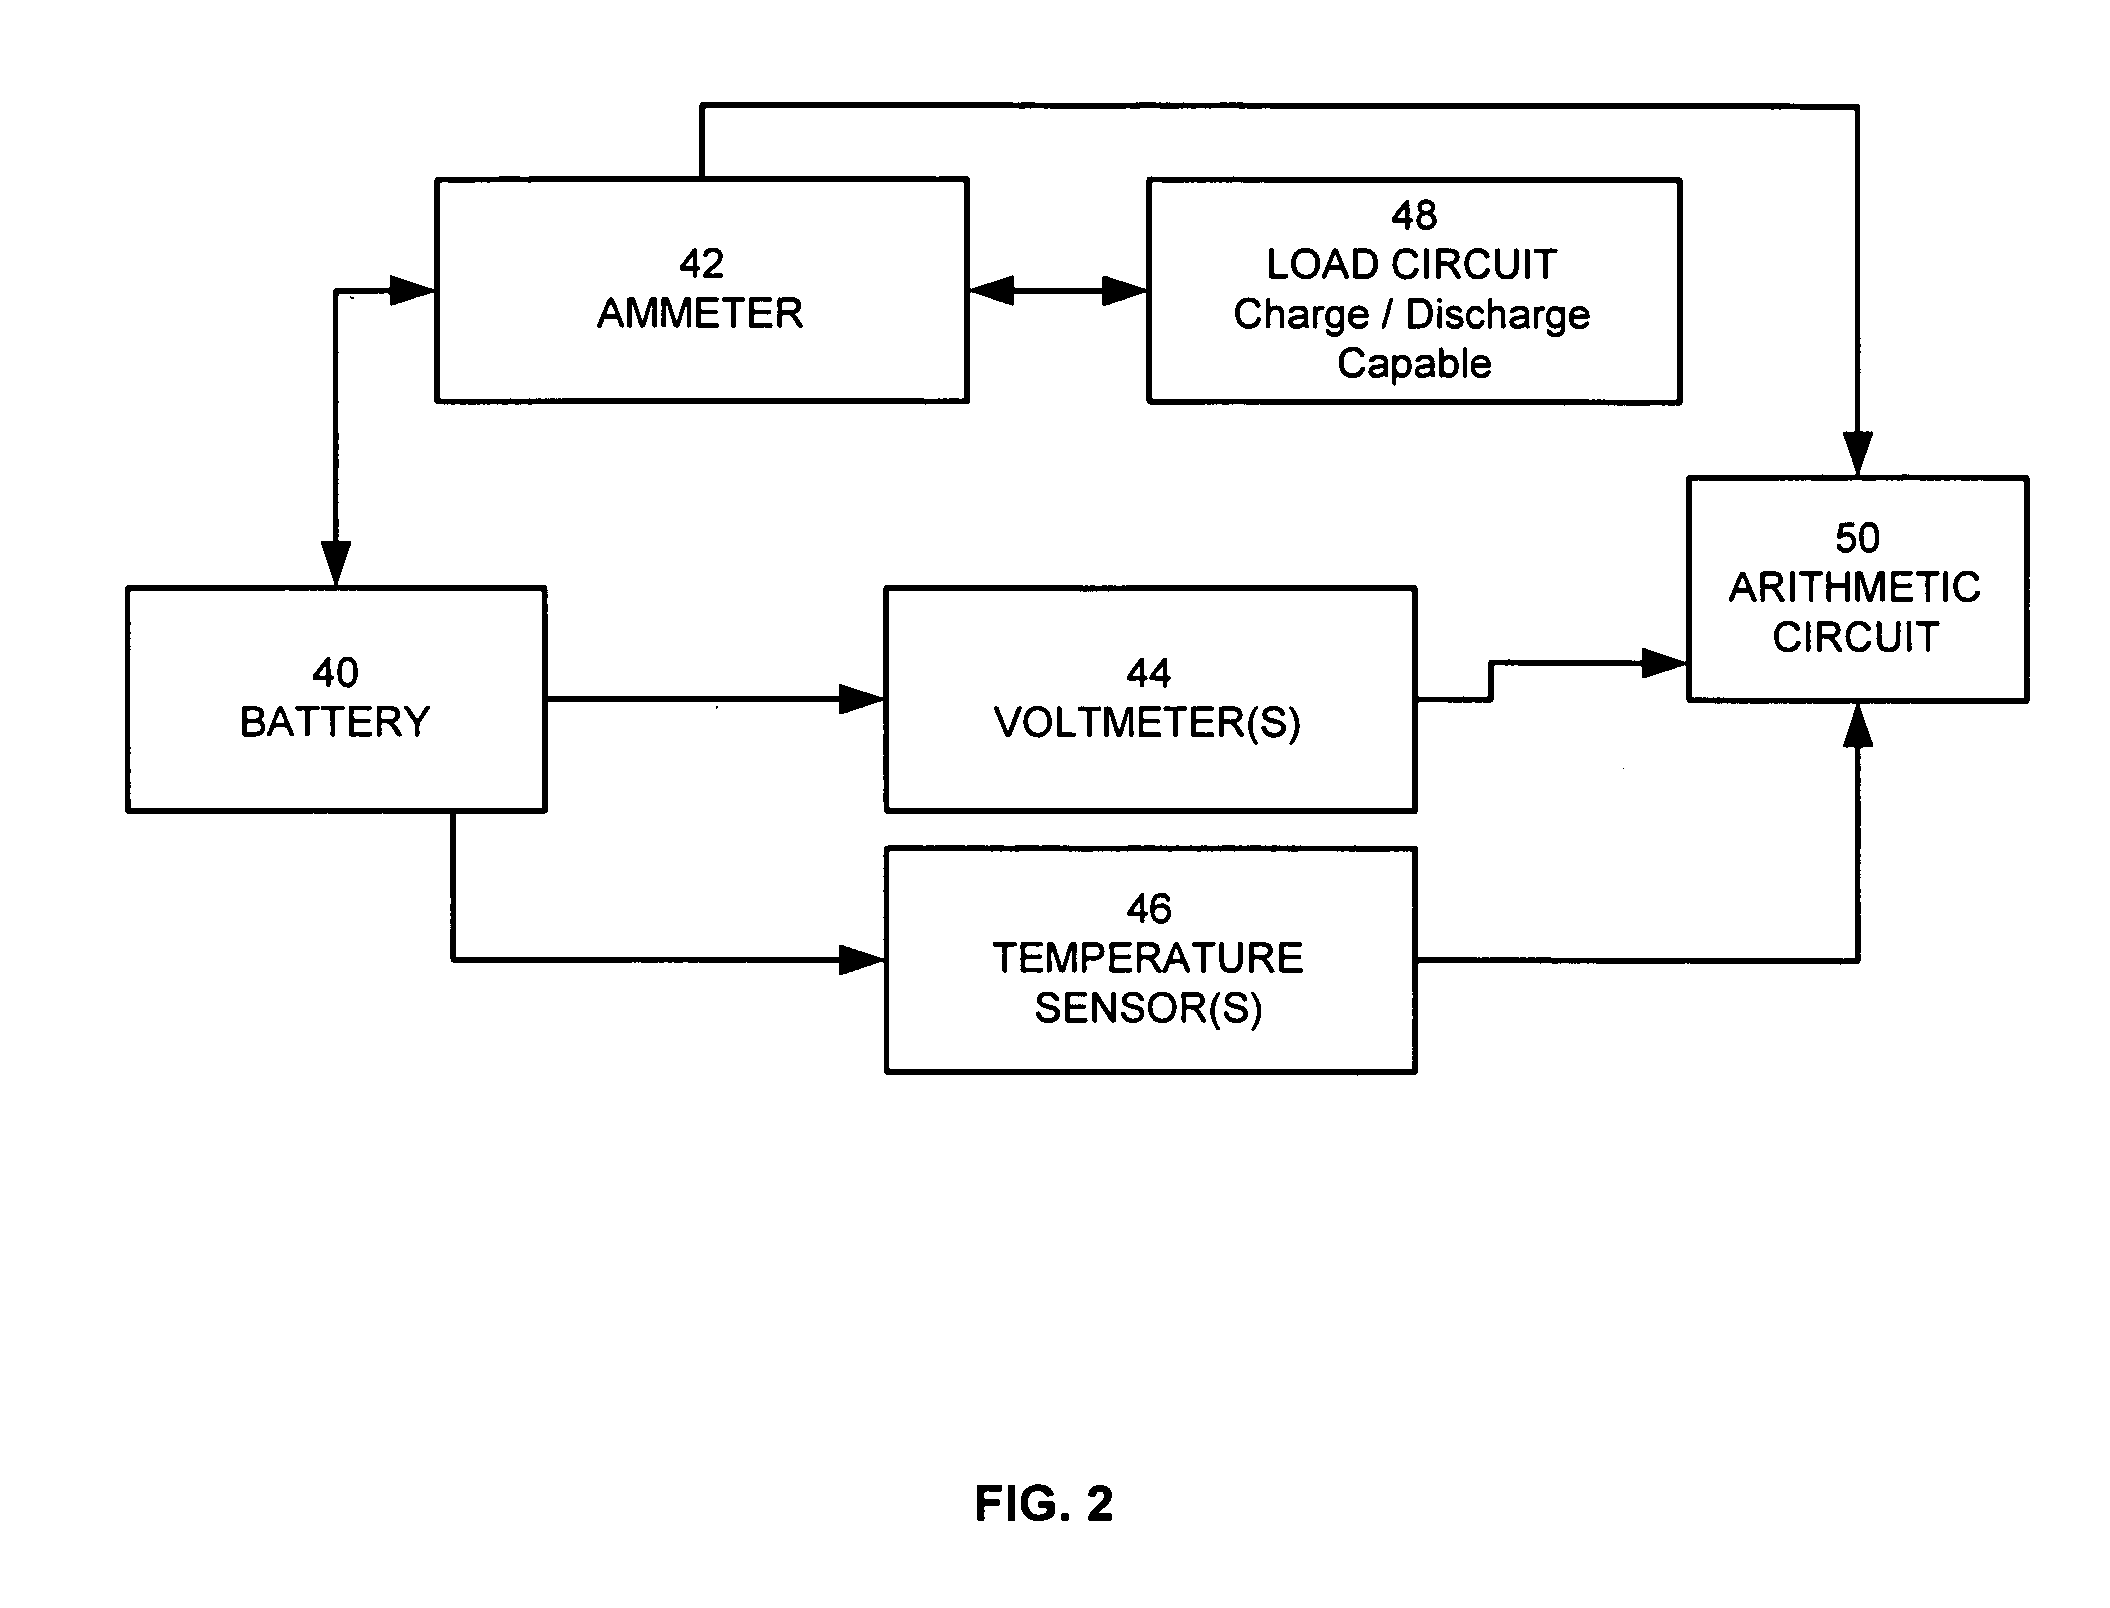 Method for calculating power capability of battery packs using advanced cell model predictive techniques